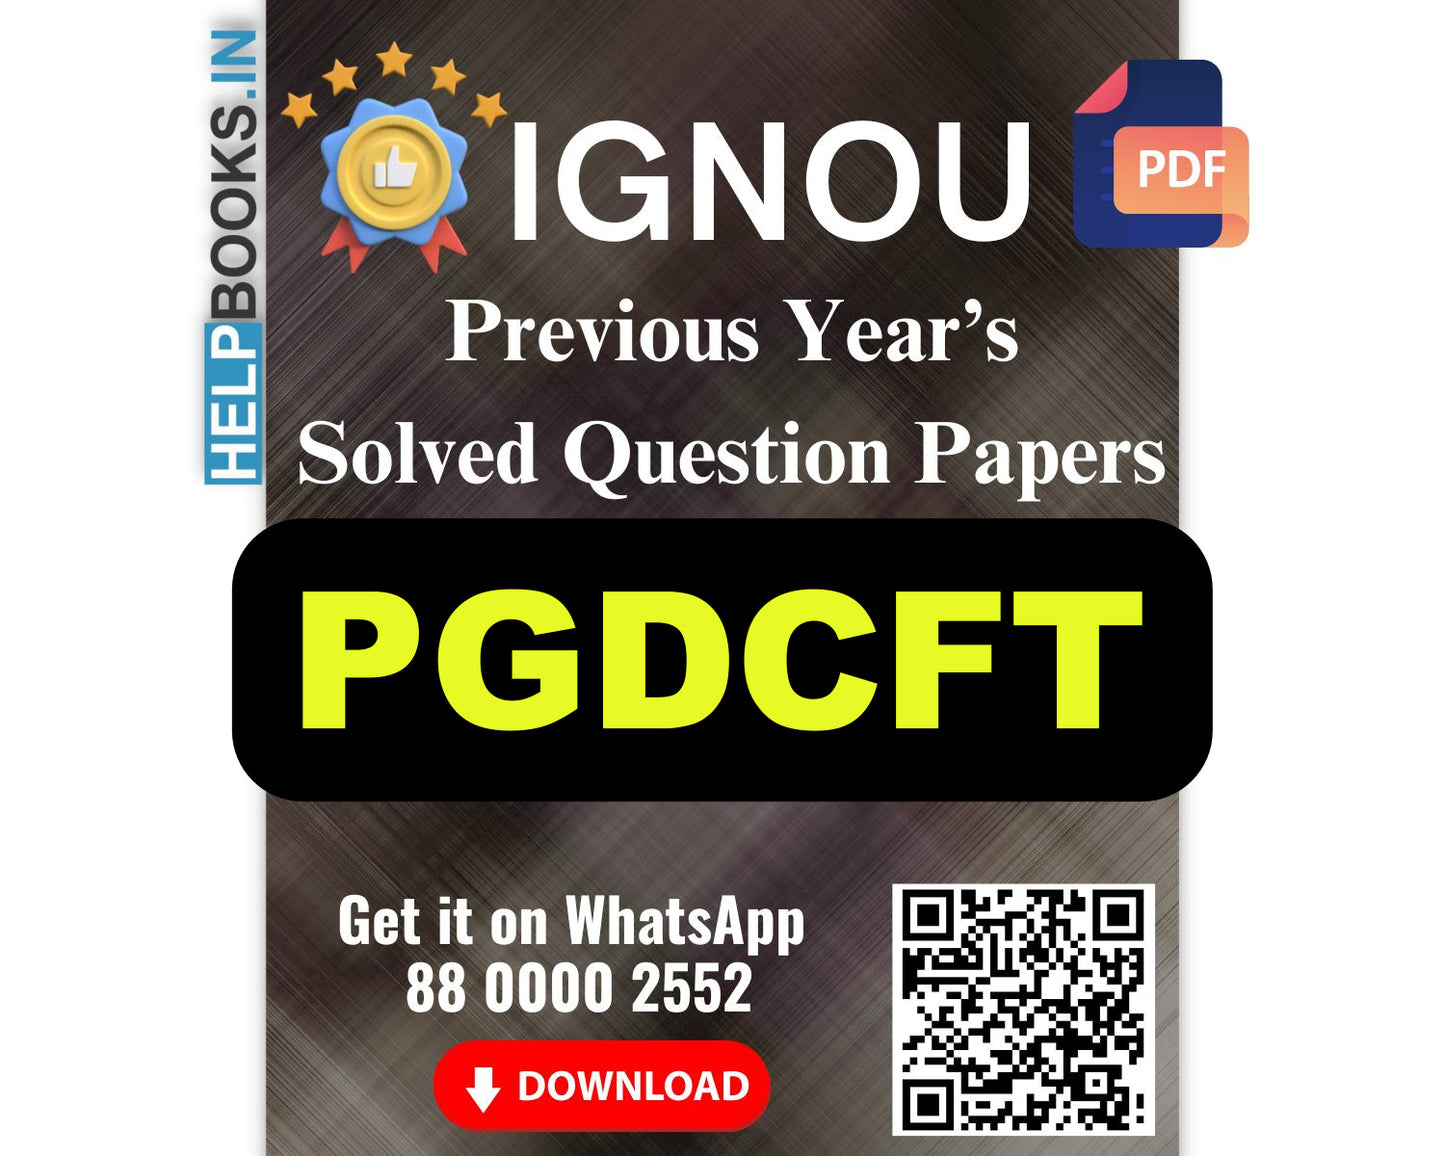 IGNOU Post Graduate Diploma in Counselling and Family Therapy (PGDCFT)- 5 Previous Years Solved IGNOU Question Papers for 2024 Examinations